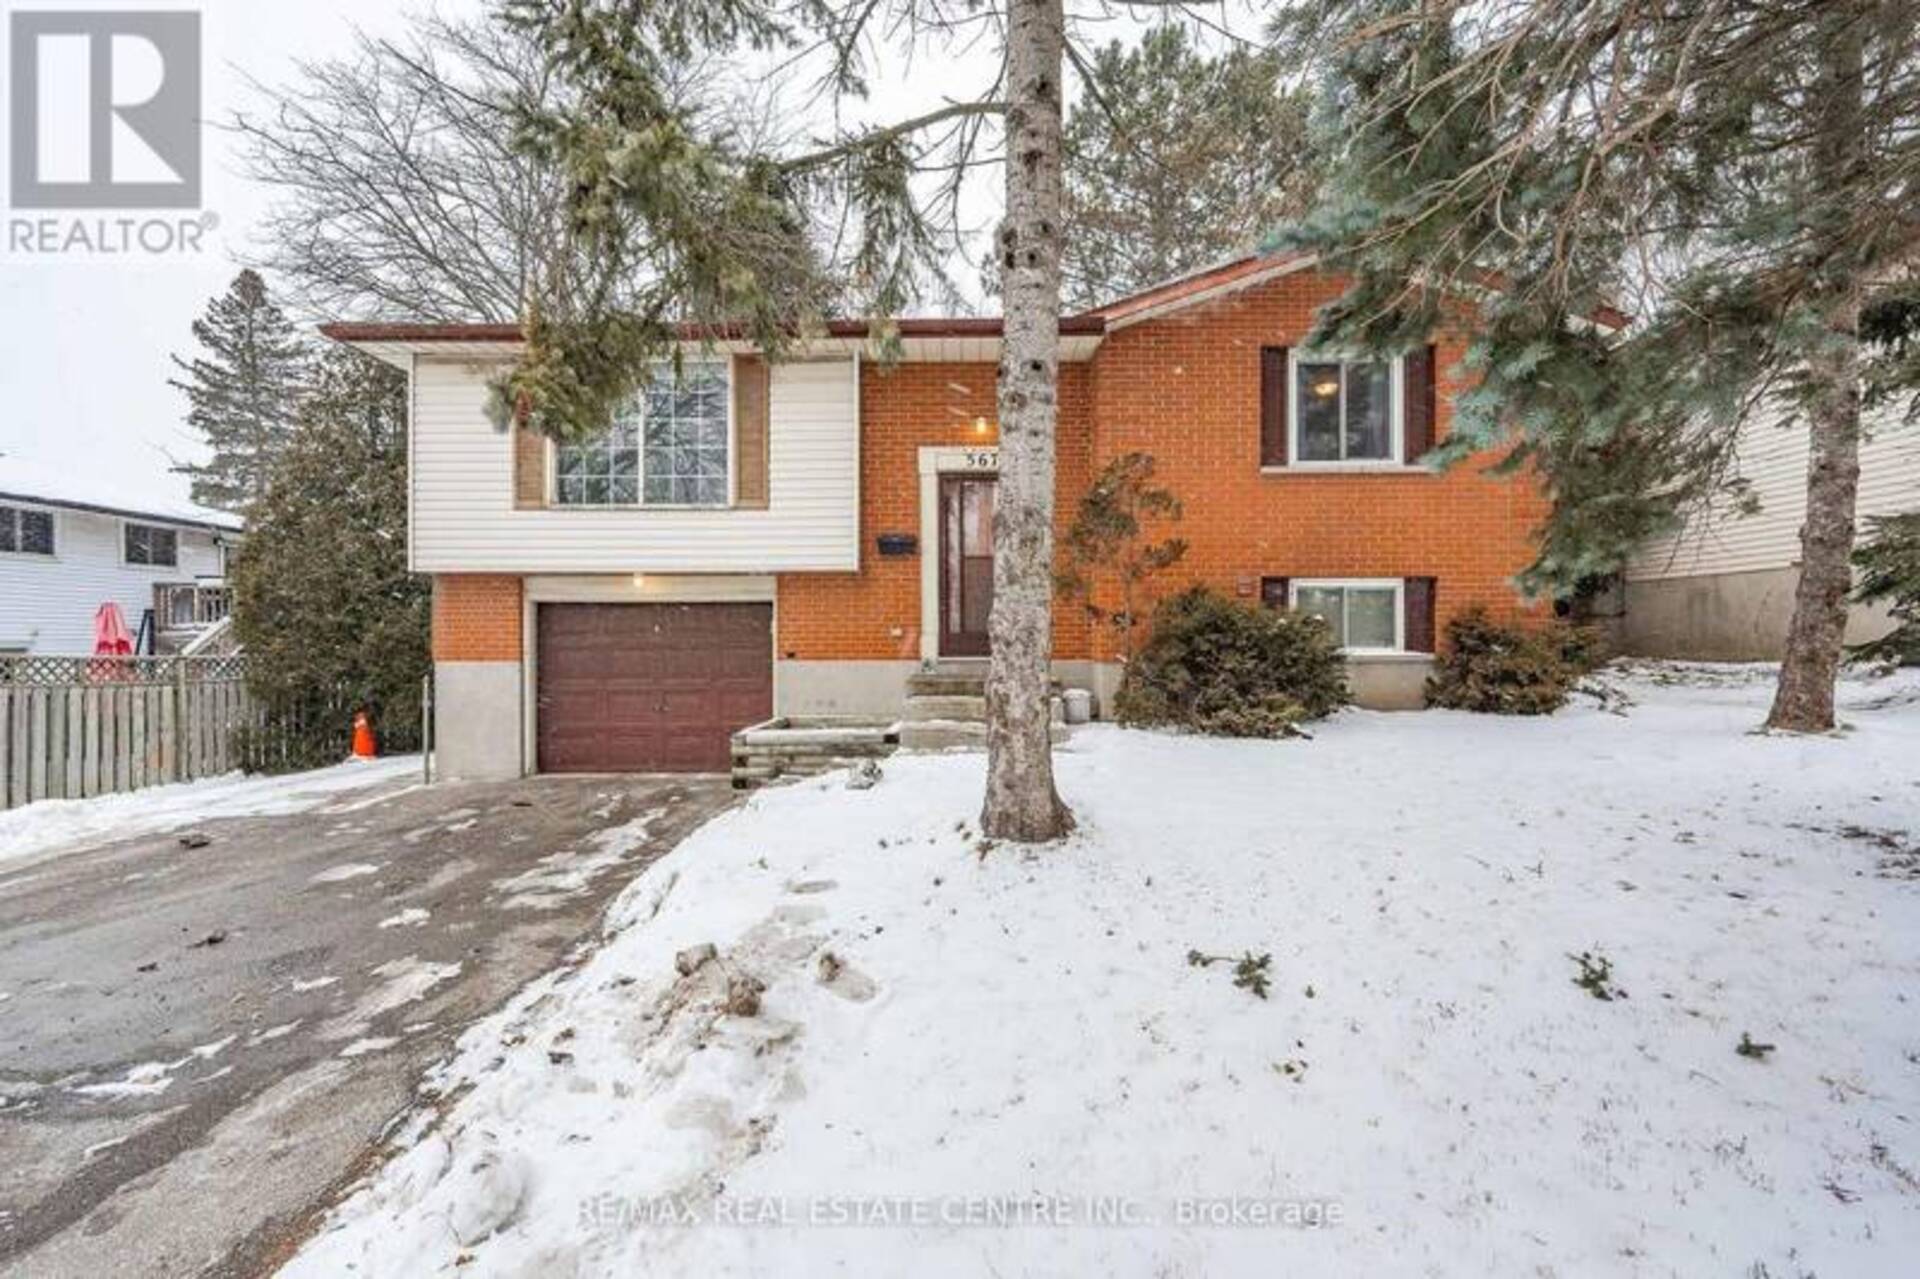 567 KORTRIGHT RD W Guelph